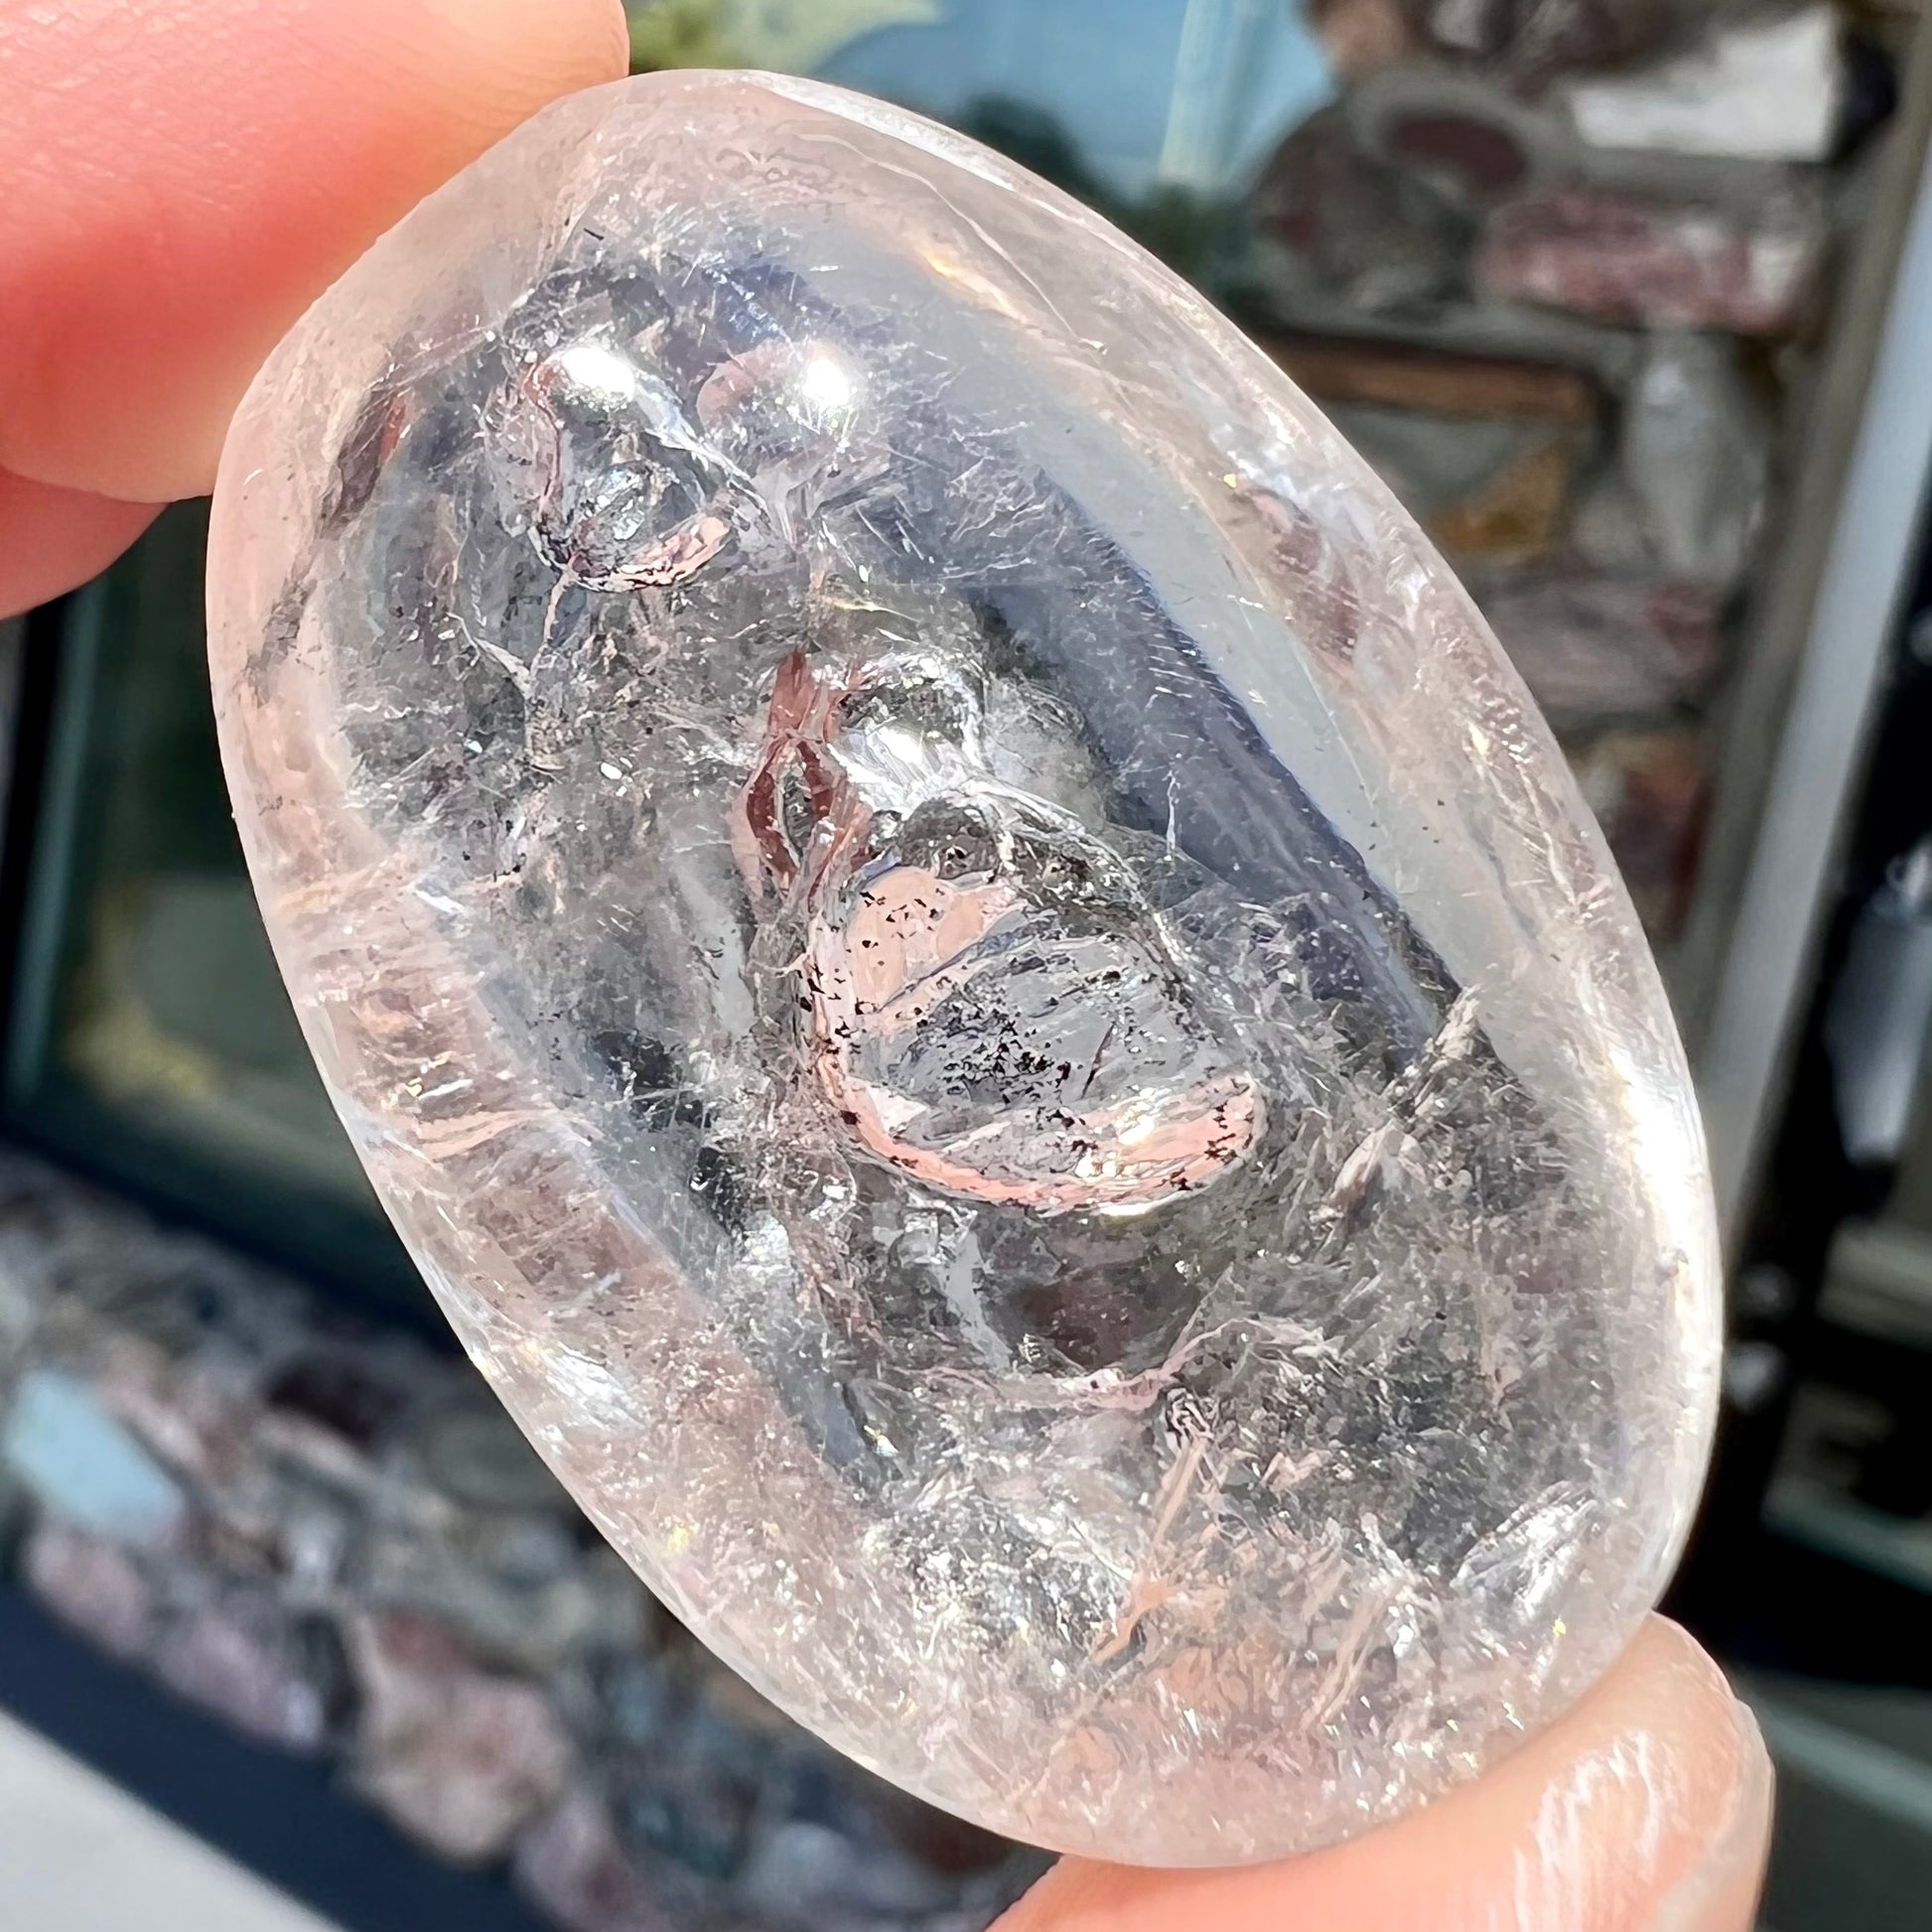 A polished clear enhydro quartz specimen that displays three phase inclusions.